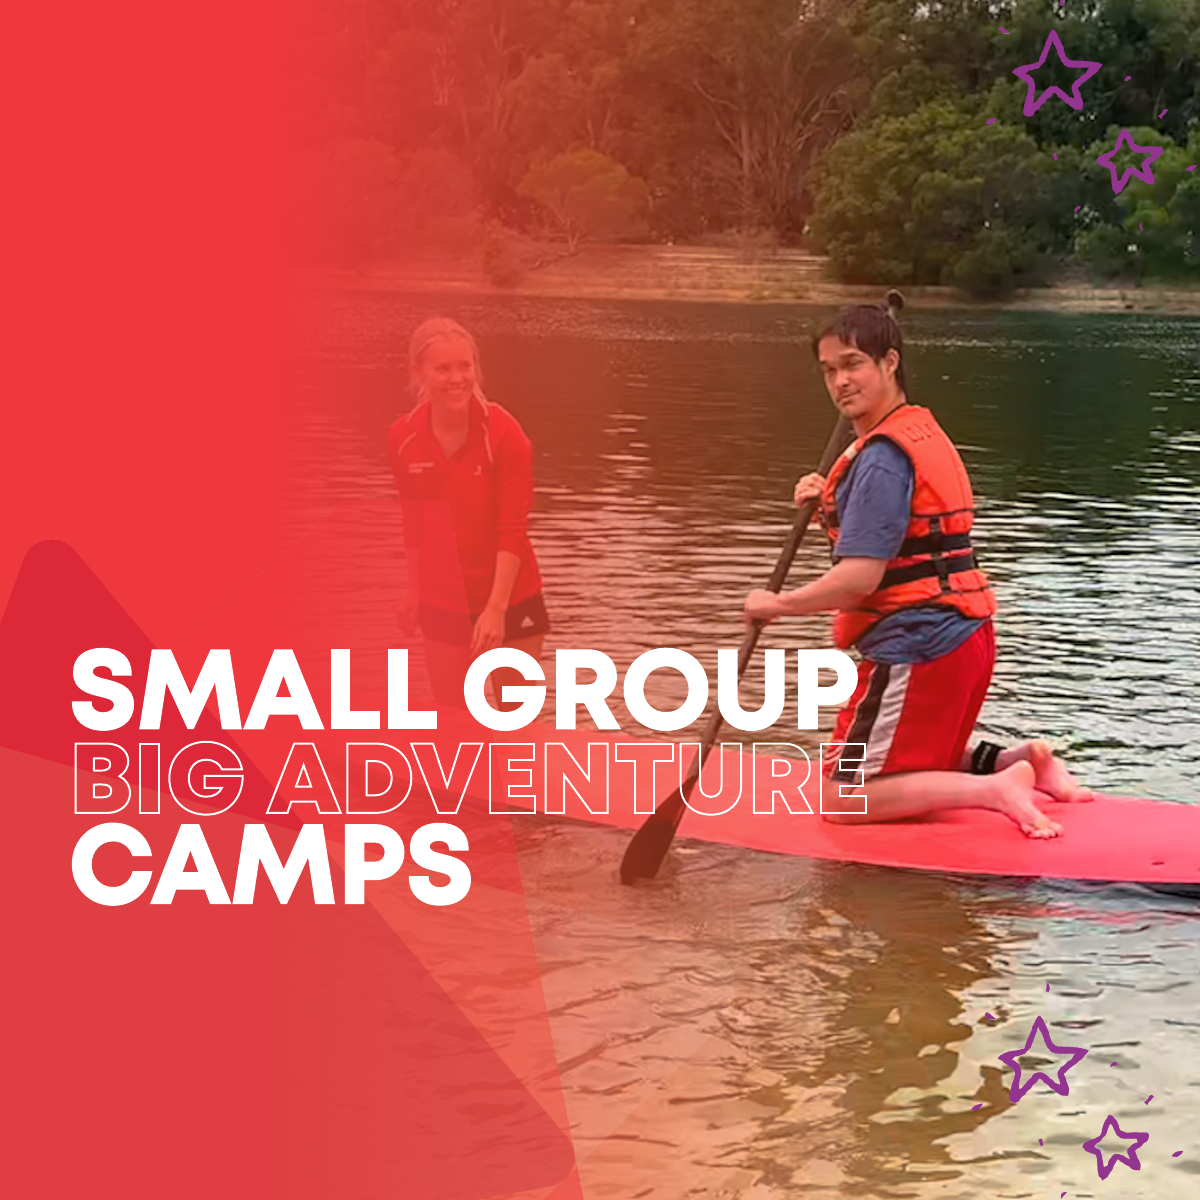 Small group, big adventure camps